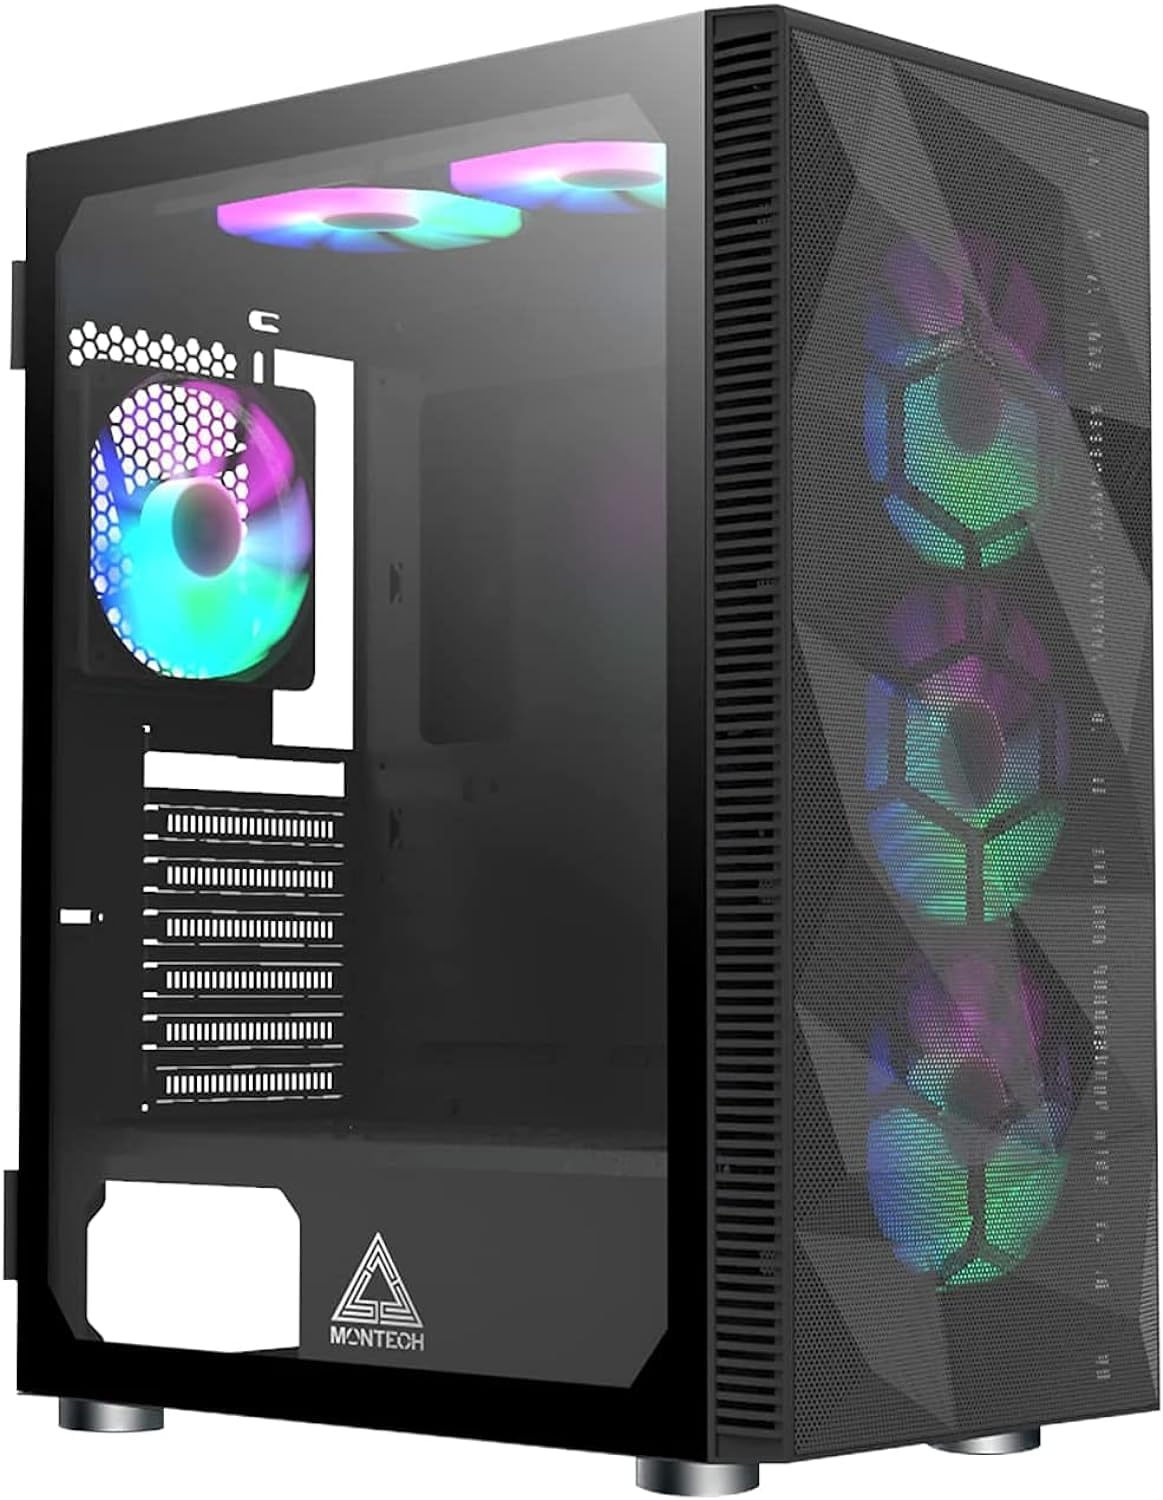 X3 Mesh, 6 Fans - 3x 140mm & 3x 120mm Fixed RGB Lighting Fans, ATX Mid-Tower PC Gaming Case, USB3.0, Door Open Tempered Glass Side Panel, High Airflow, Black